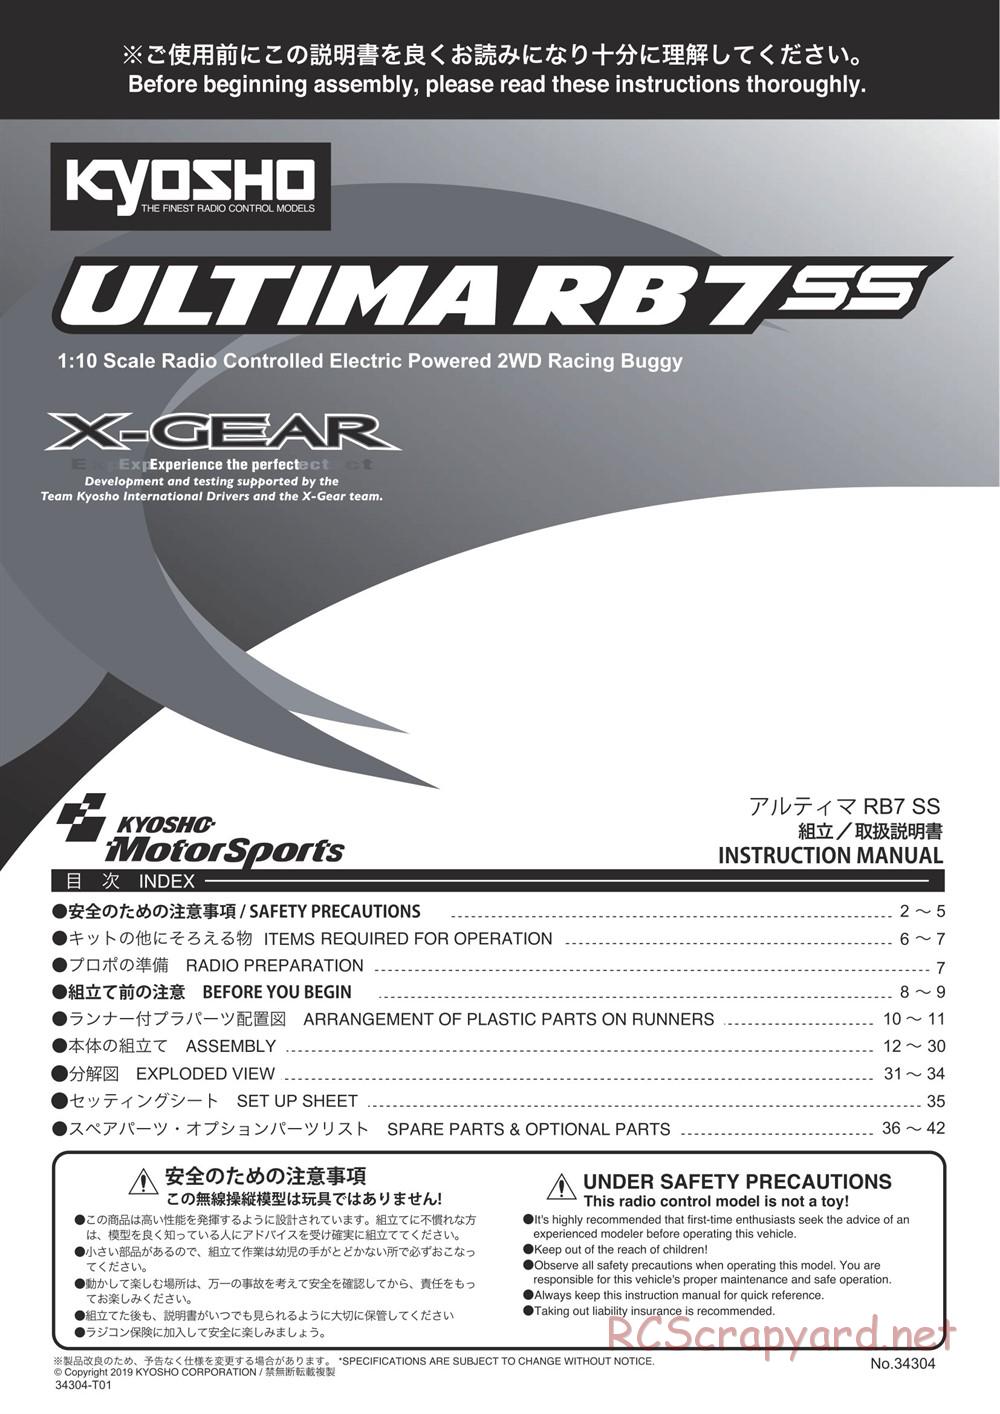 Kyosho - Ultima RB7SS - Manual - Page 1